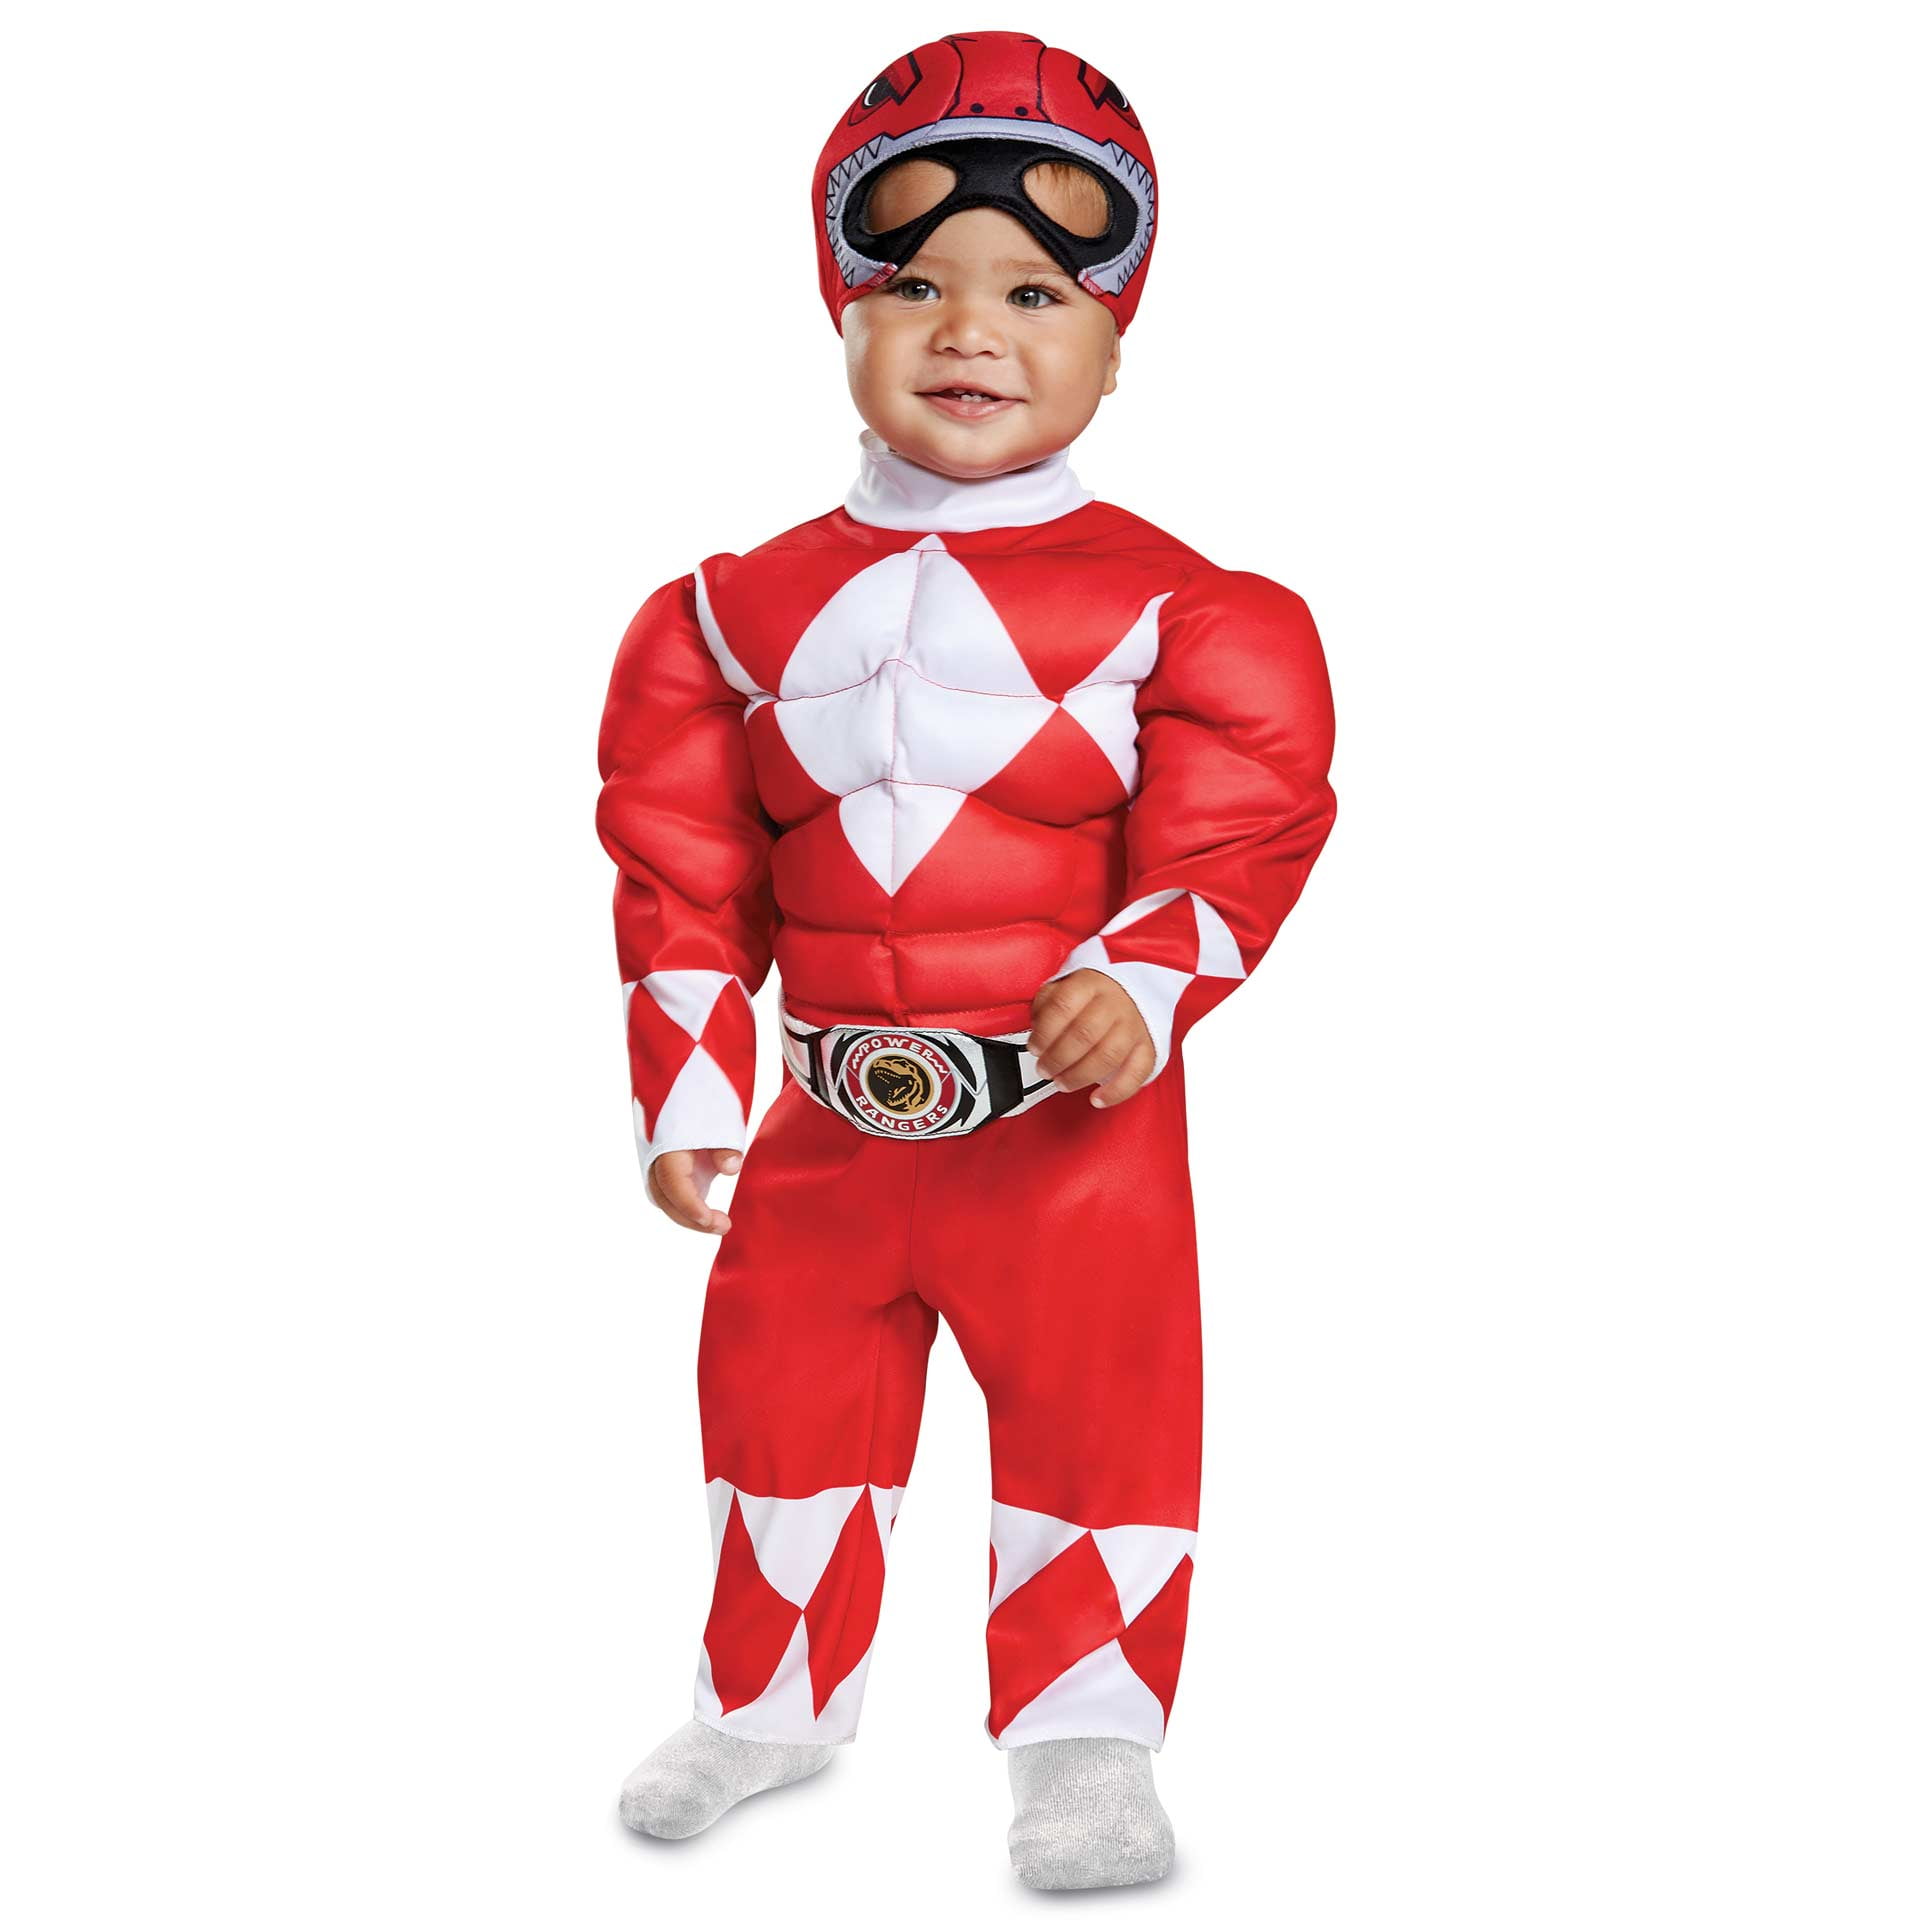 Boys Deluxe Power Rangers Movie Red Ranger Fancy Dress Child Kids Outfit 